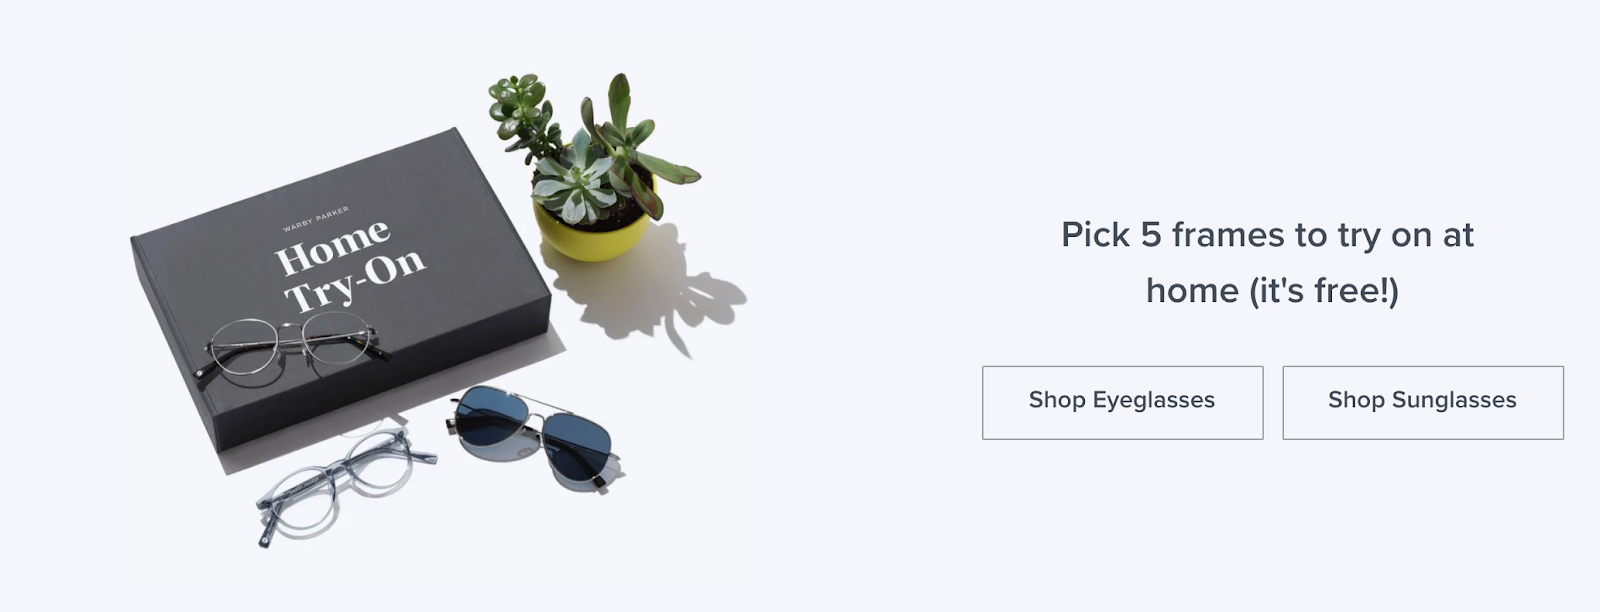 Warby Parker successfully blends in-person and online experiences